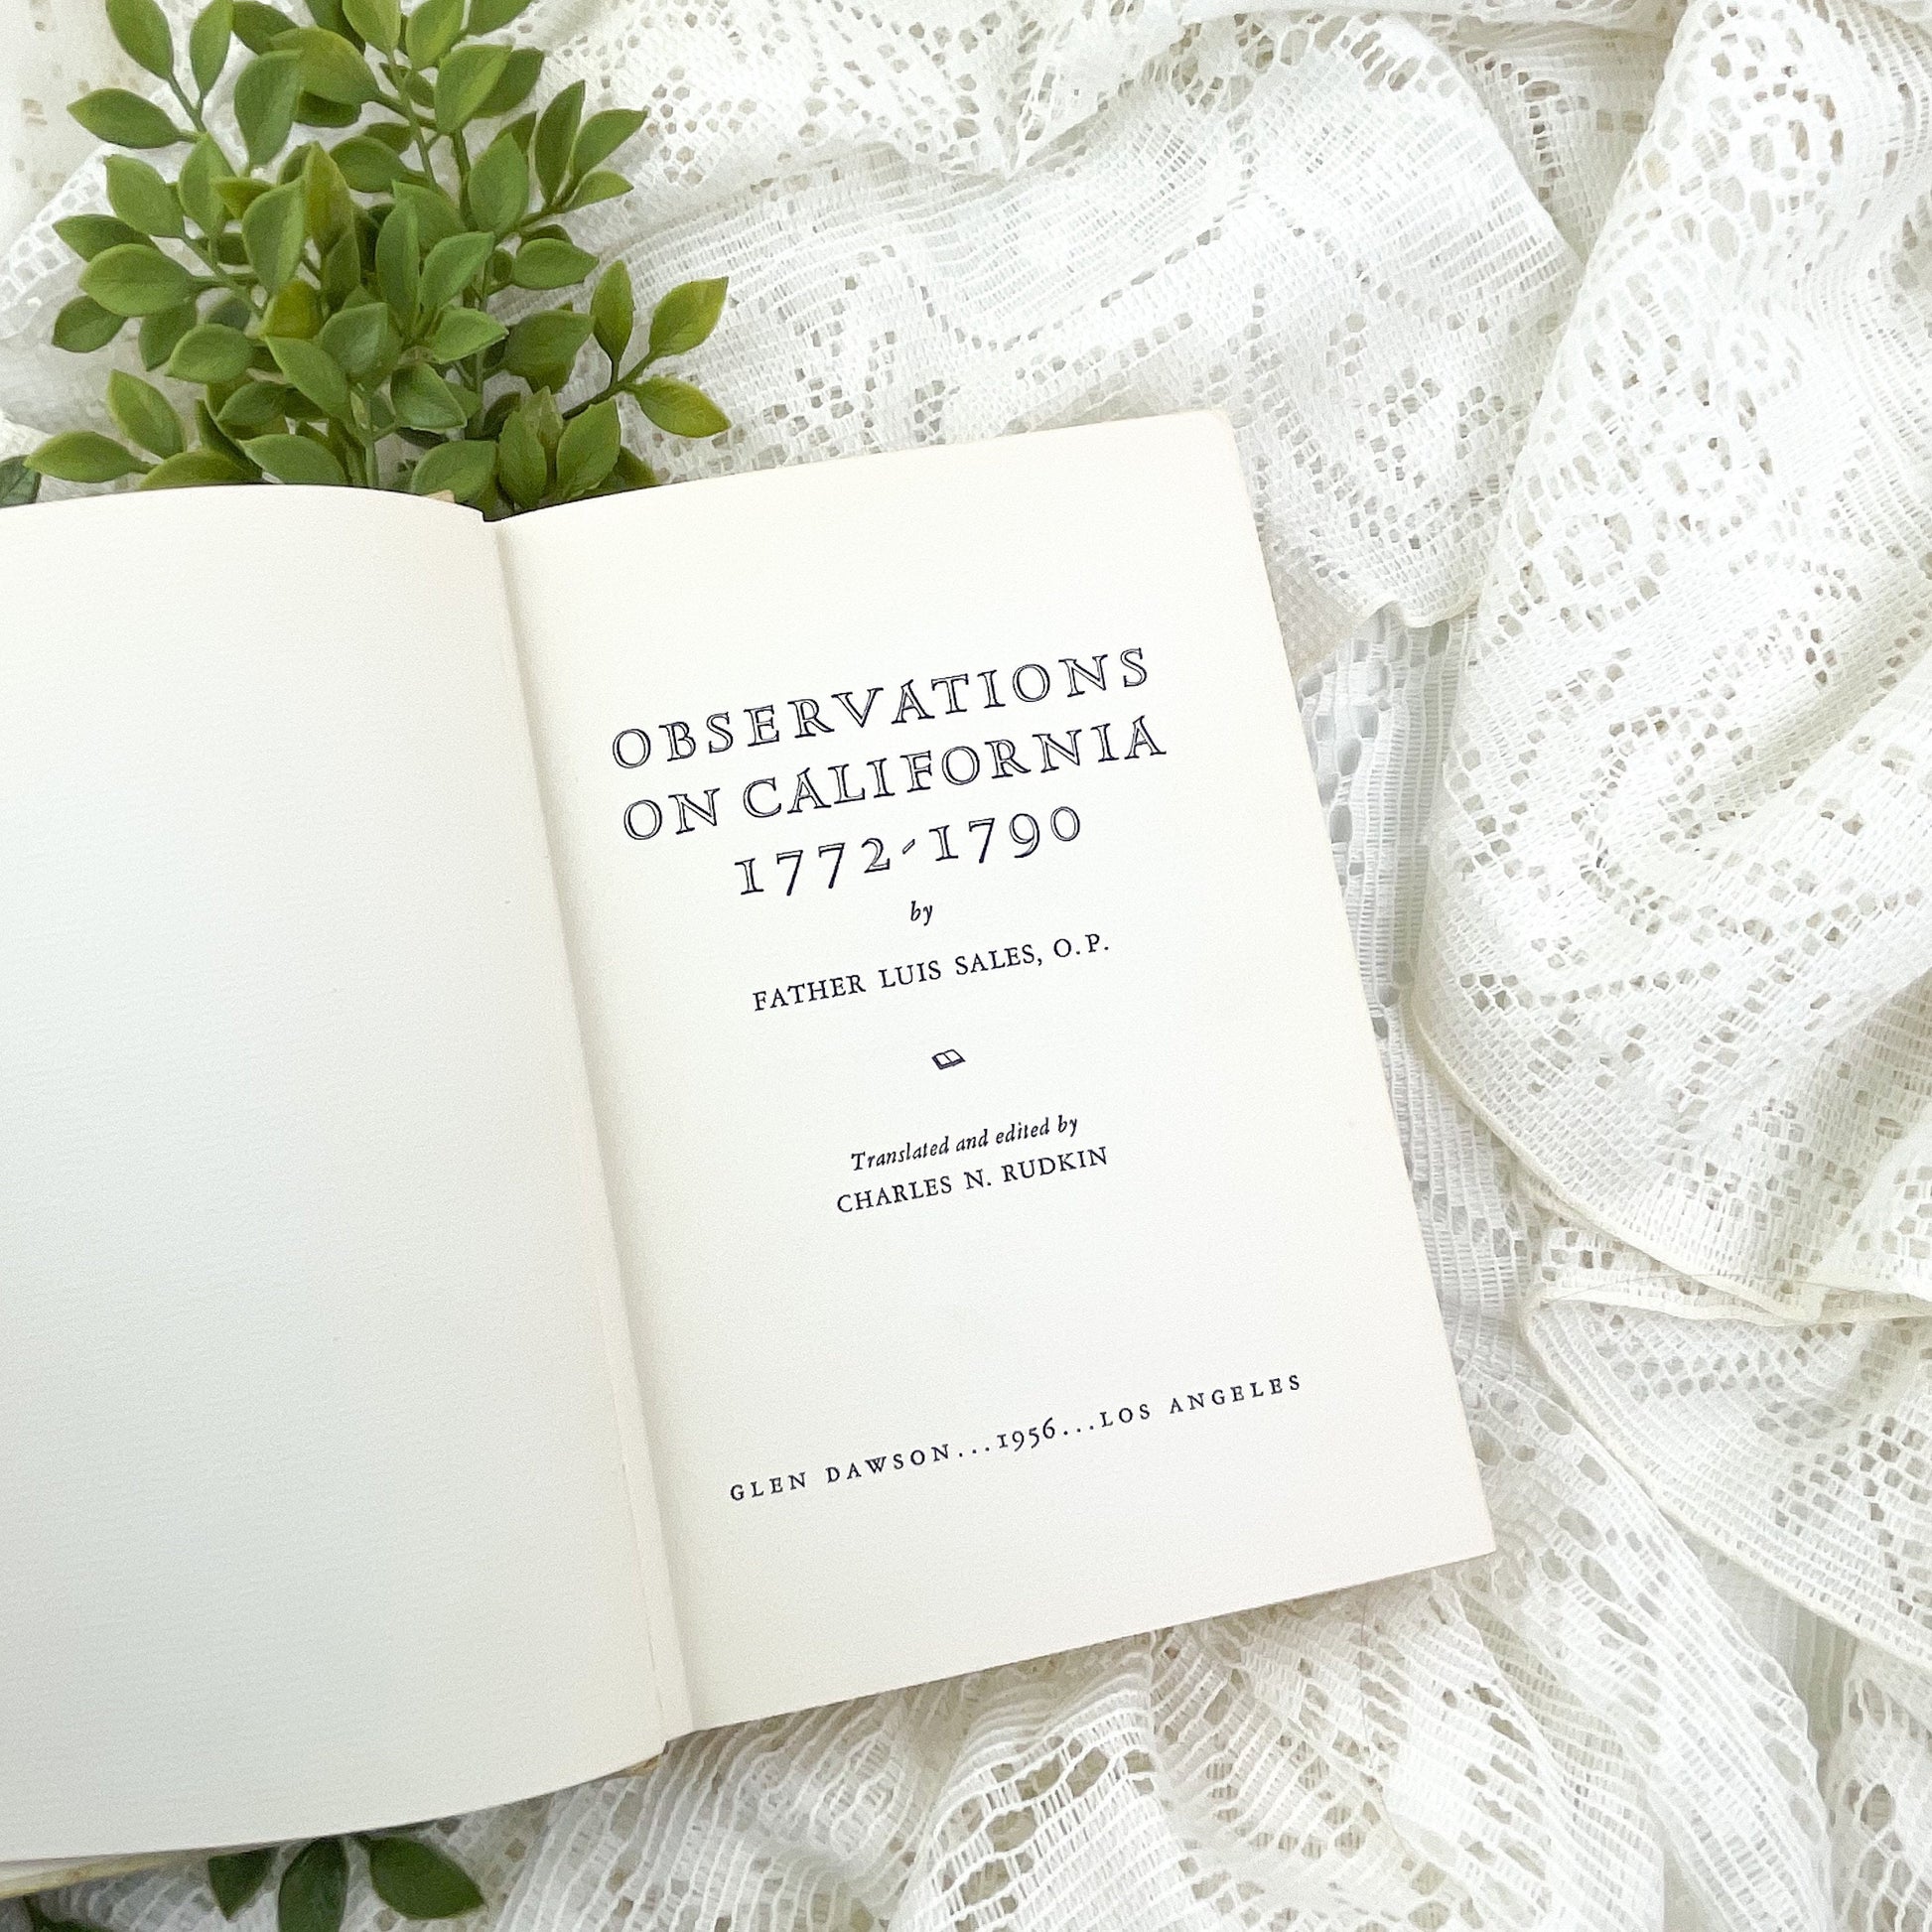 Observations on California 1772-1790, Father Luis Sales O.P., Limited Copies